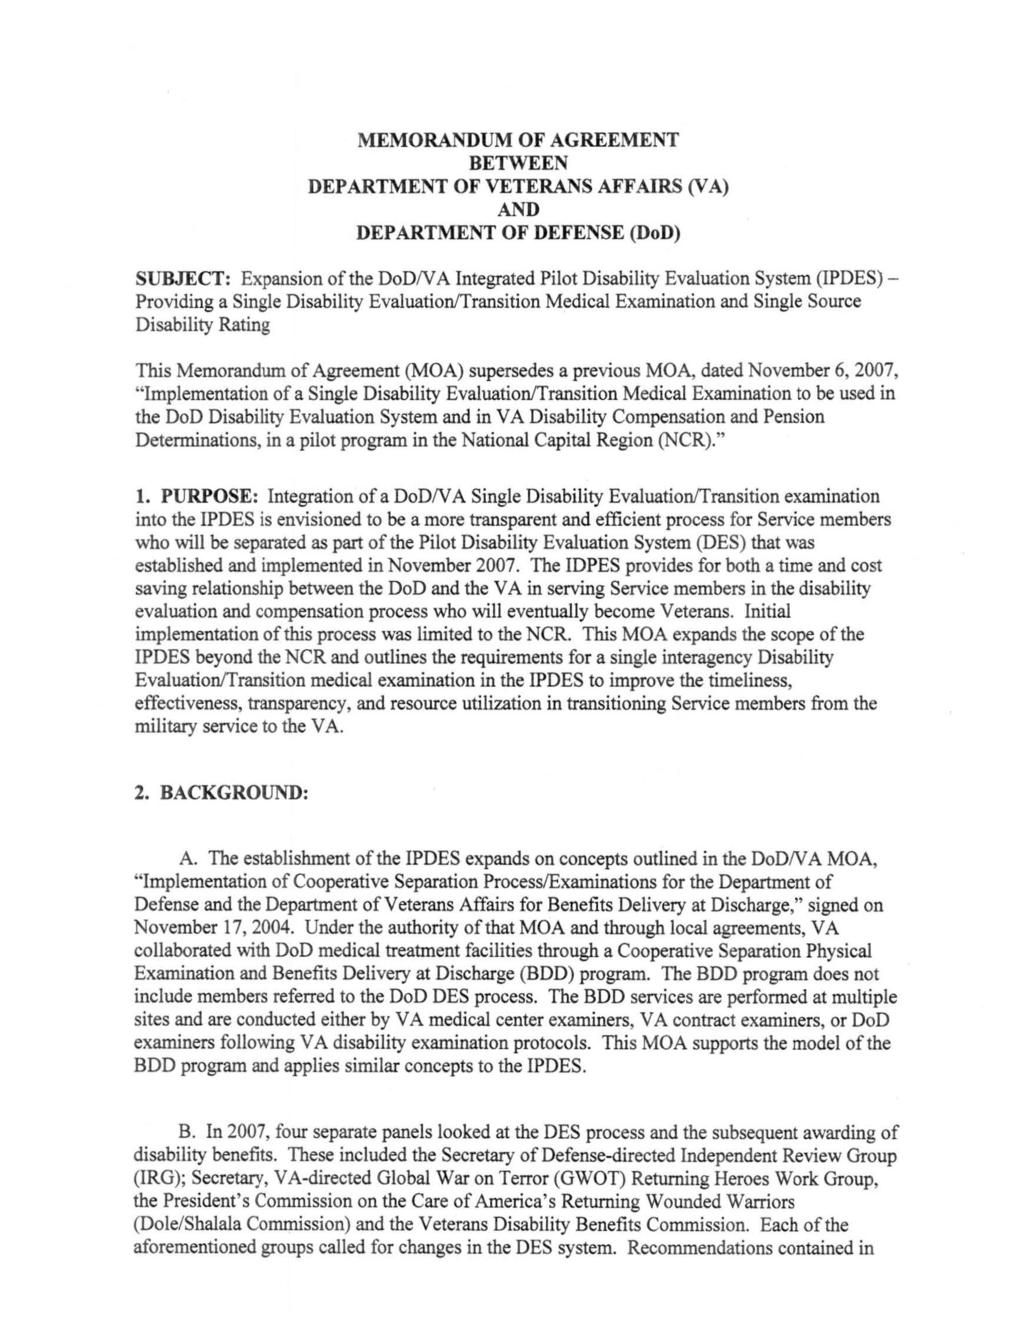 MEMORANDUM OF AGREEMENT BETWEEN DEPARTMENT OF VETERANS AFFAIRS (VA) AND DEPARTMENT OF DEFENSE (DoD) SUBJECT: Expansion ofthe DoDNA Integrated Pilot Disability Evaluation System (IPDES) Providing a